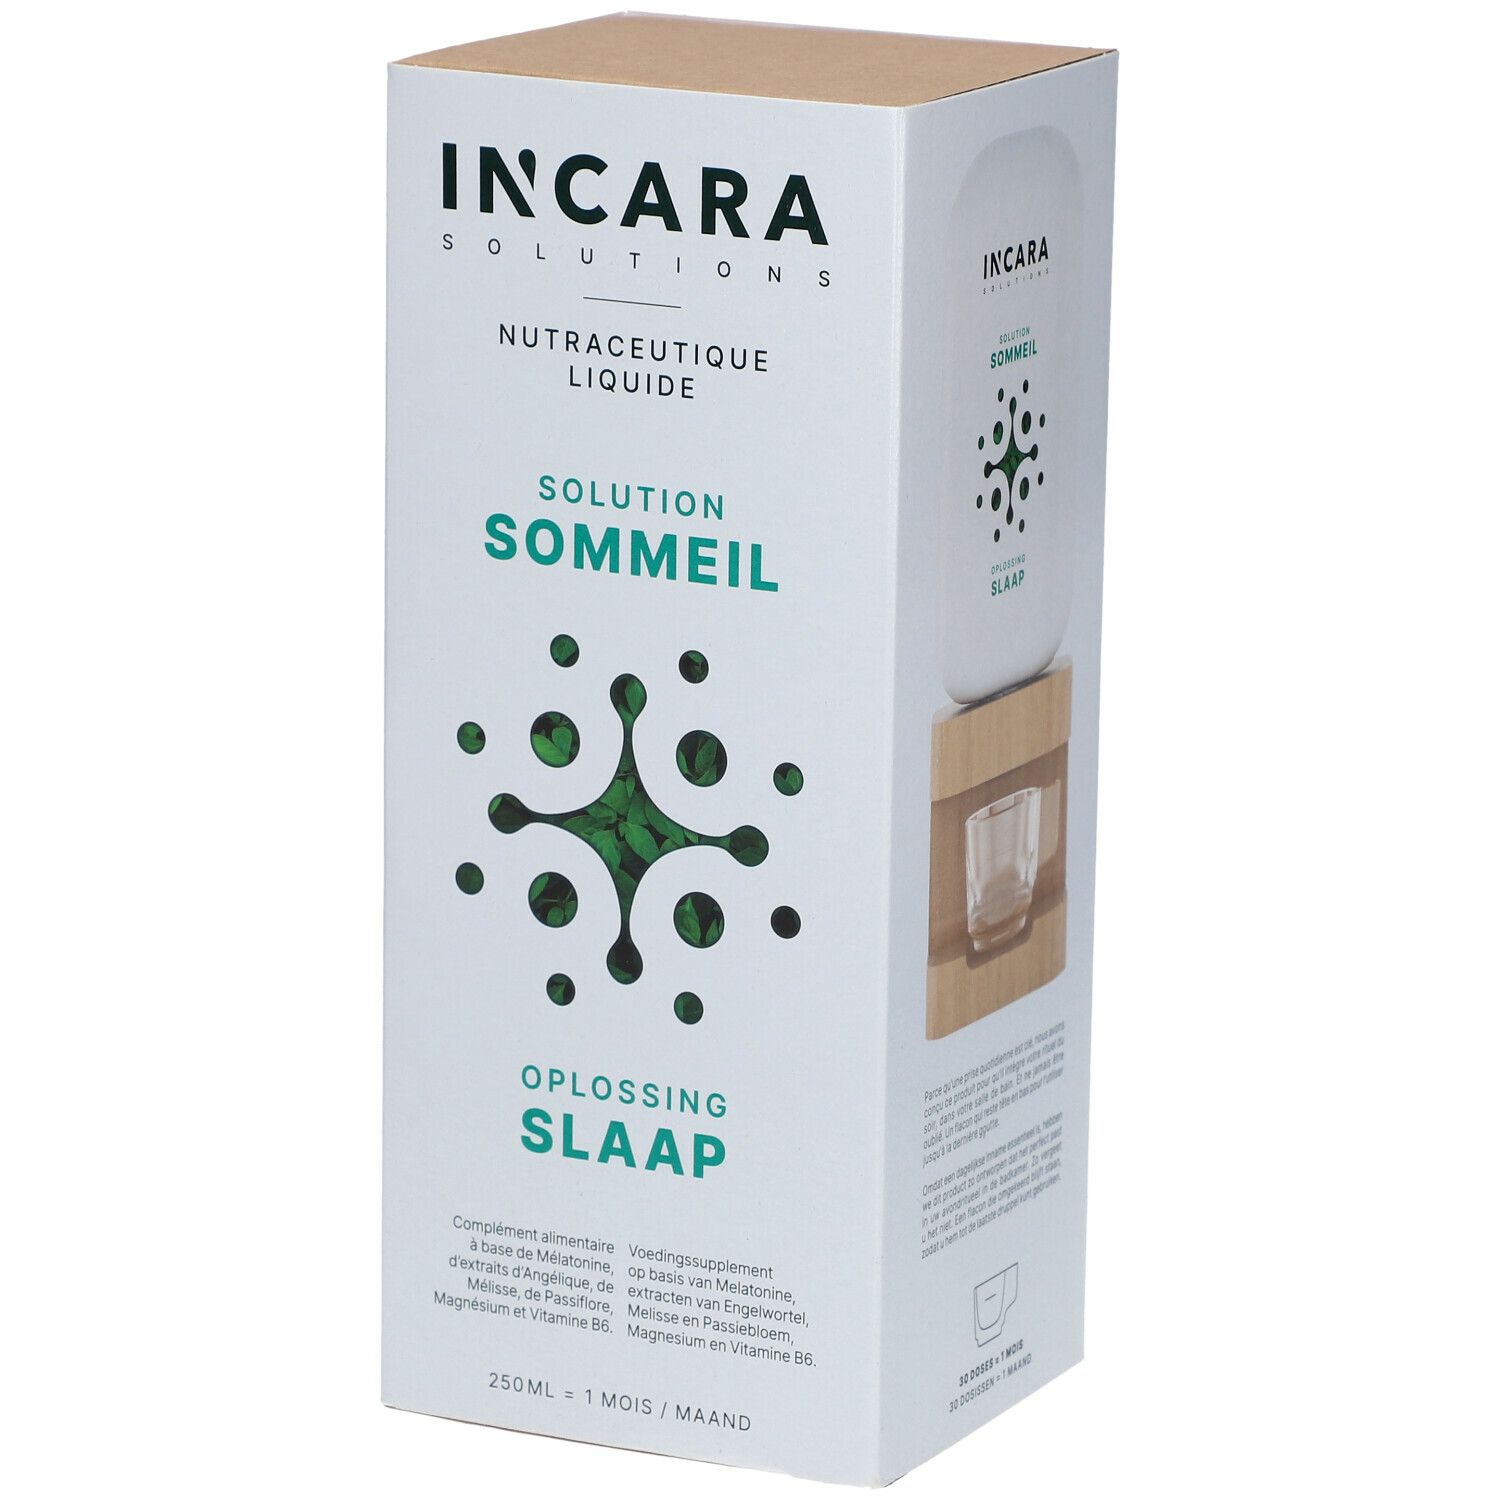 Incara Solutions Sommeil